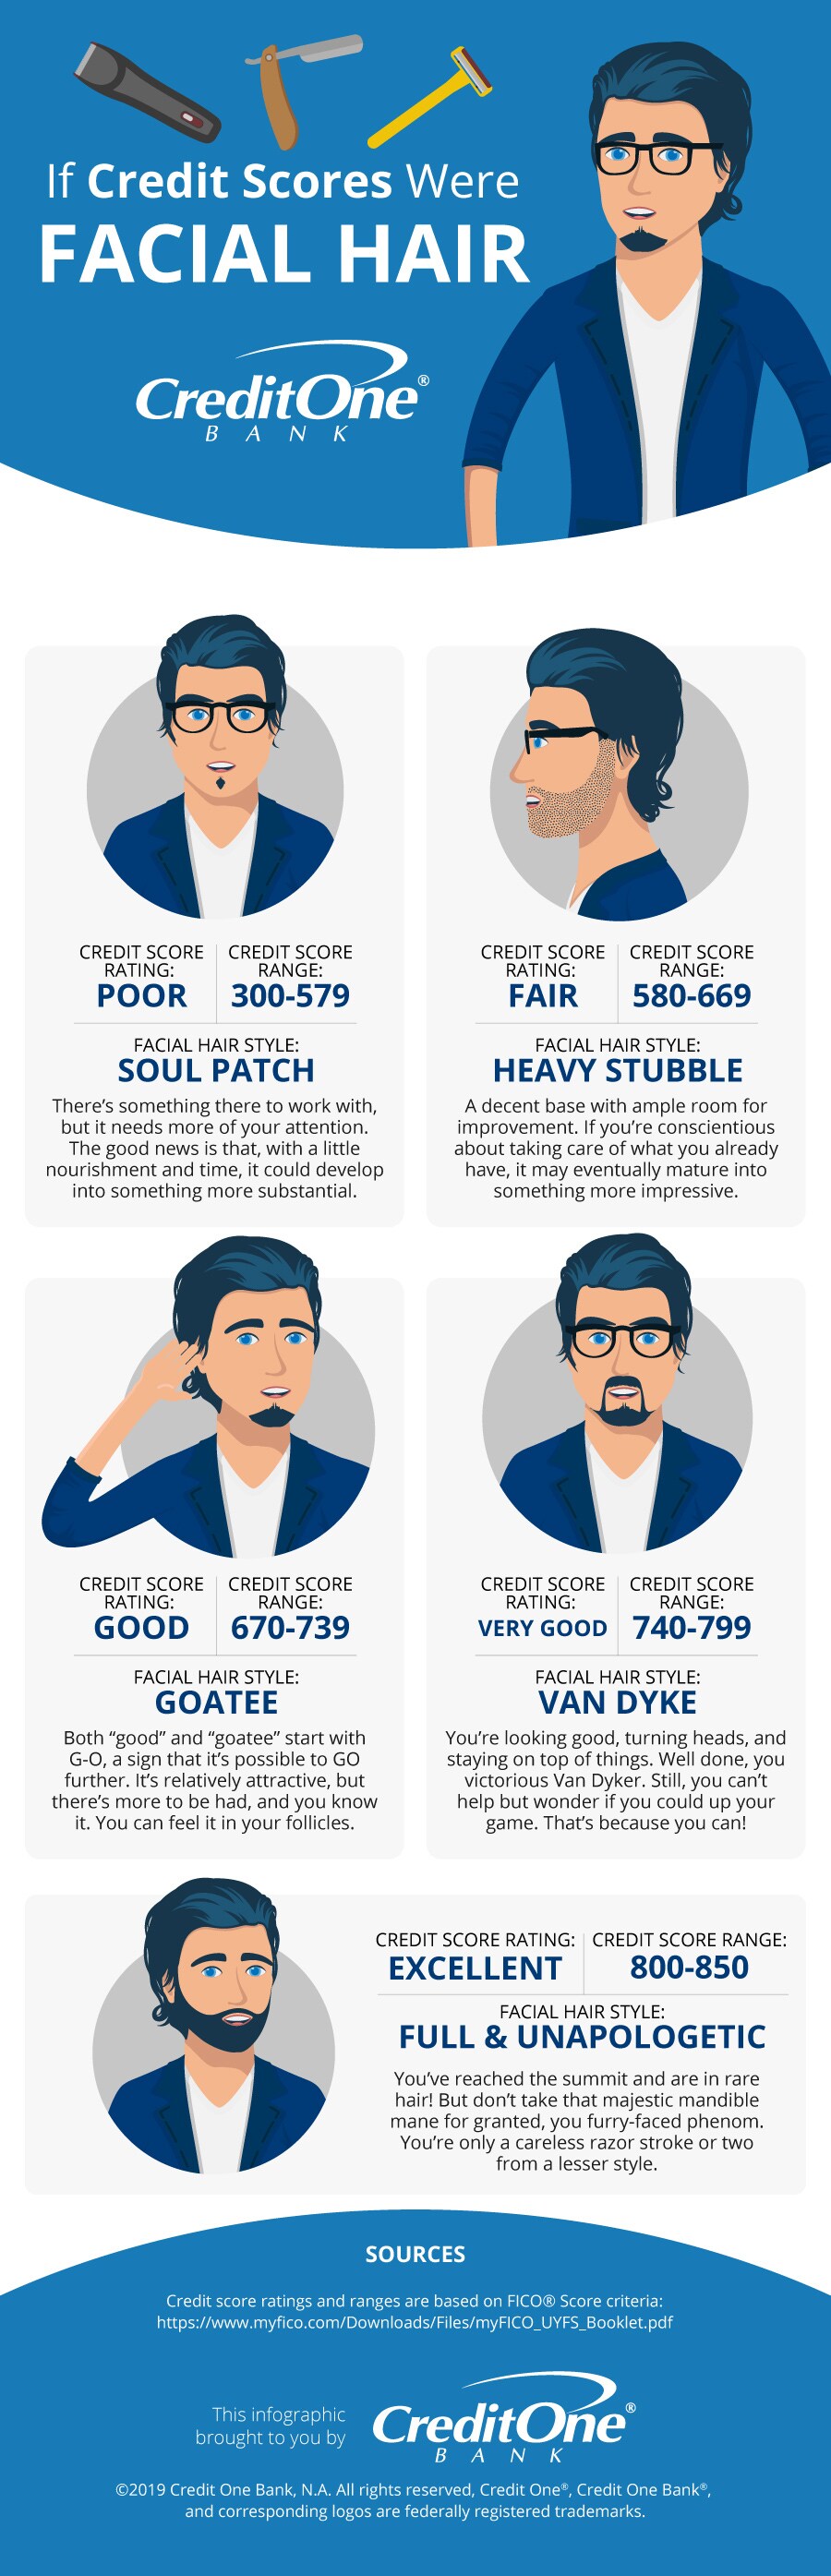 What Kind of Beard Would Your Credit Score Be?